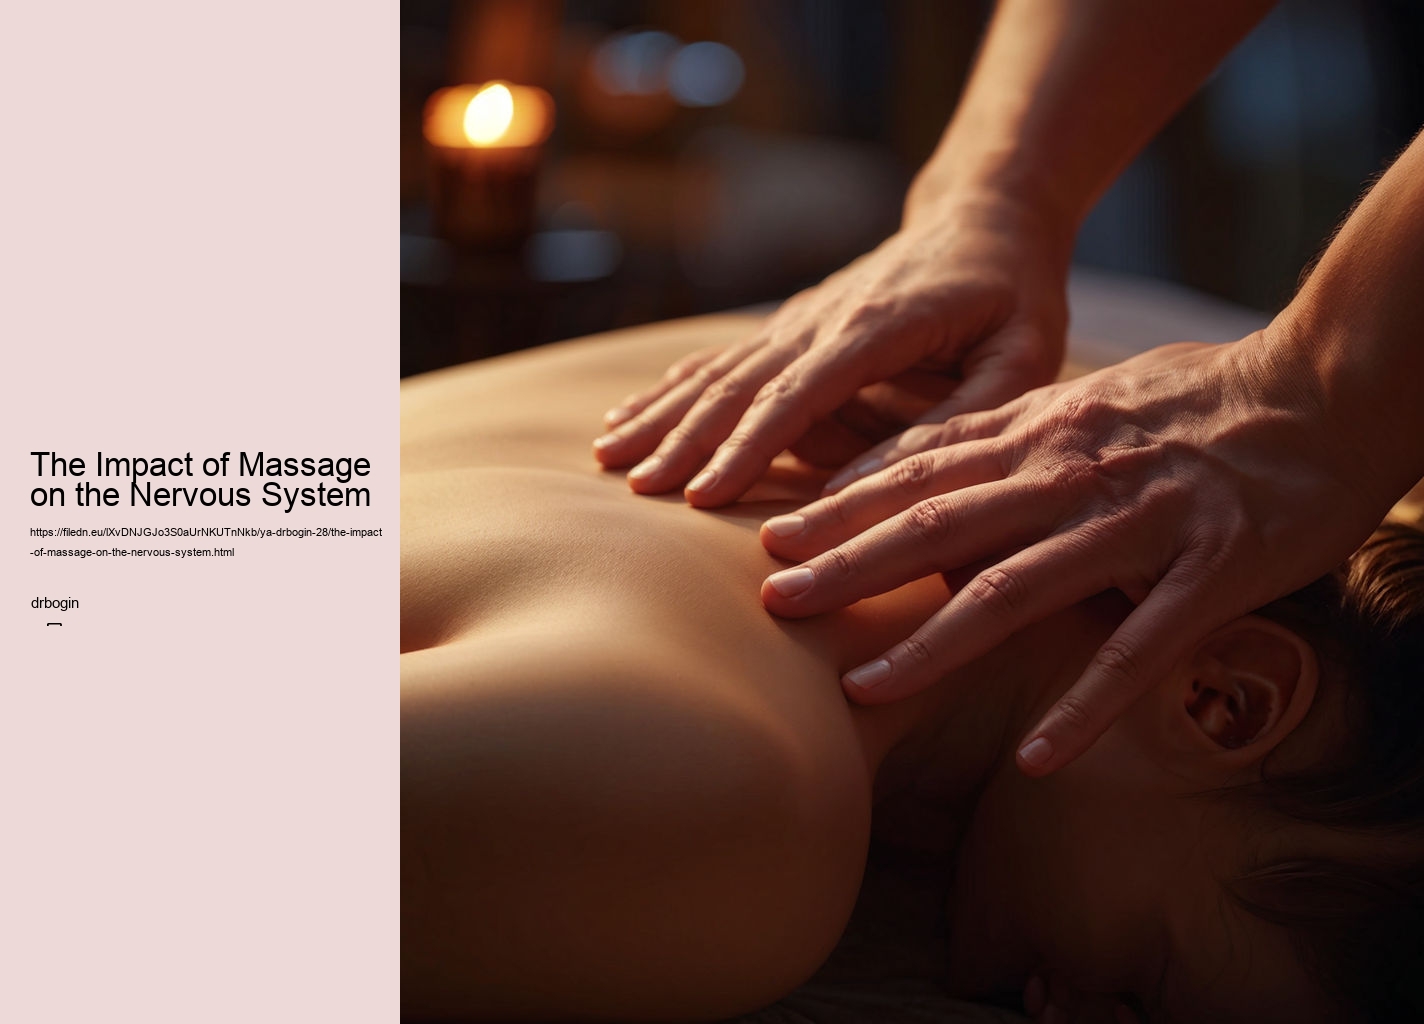 The Impact of Massage on the Nervous System